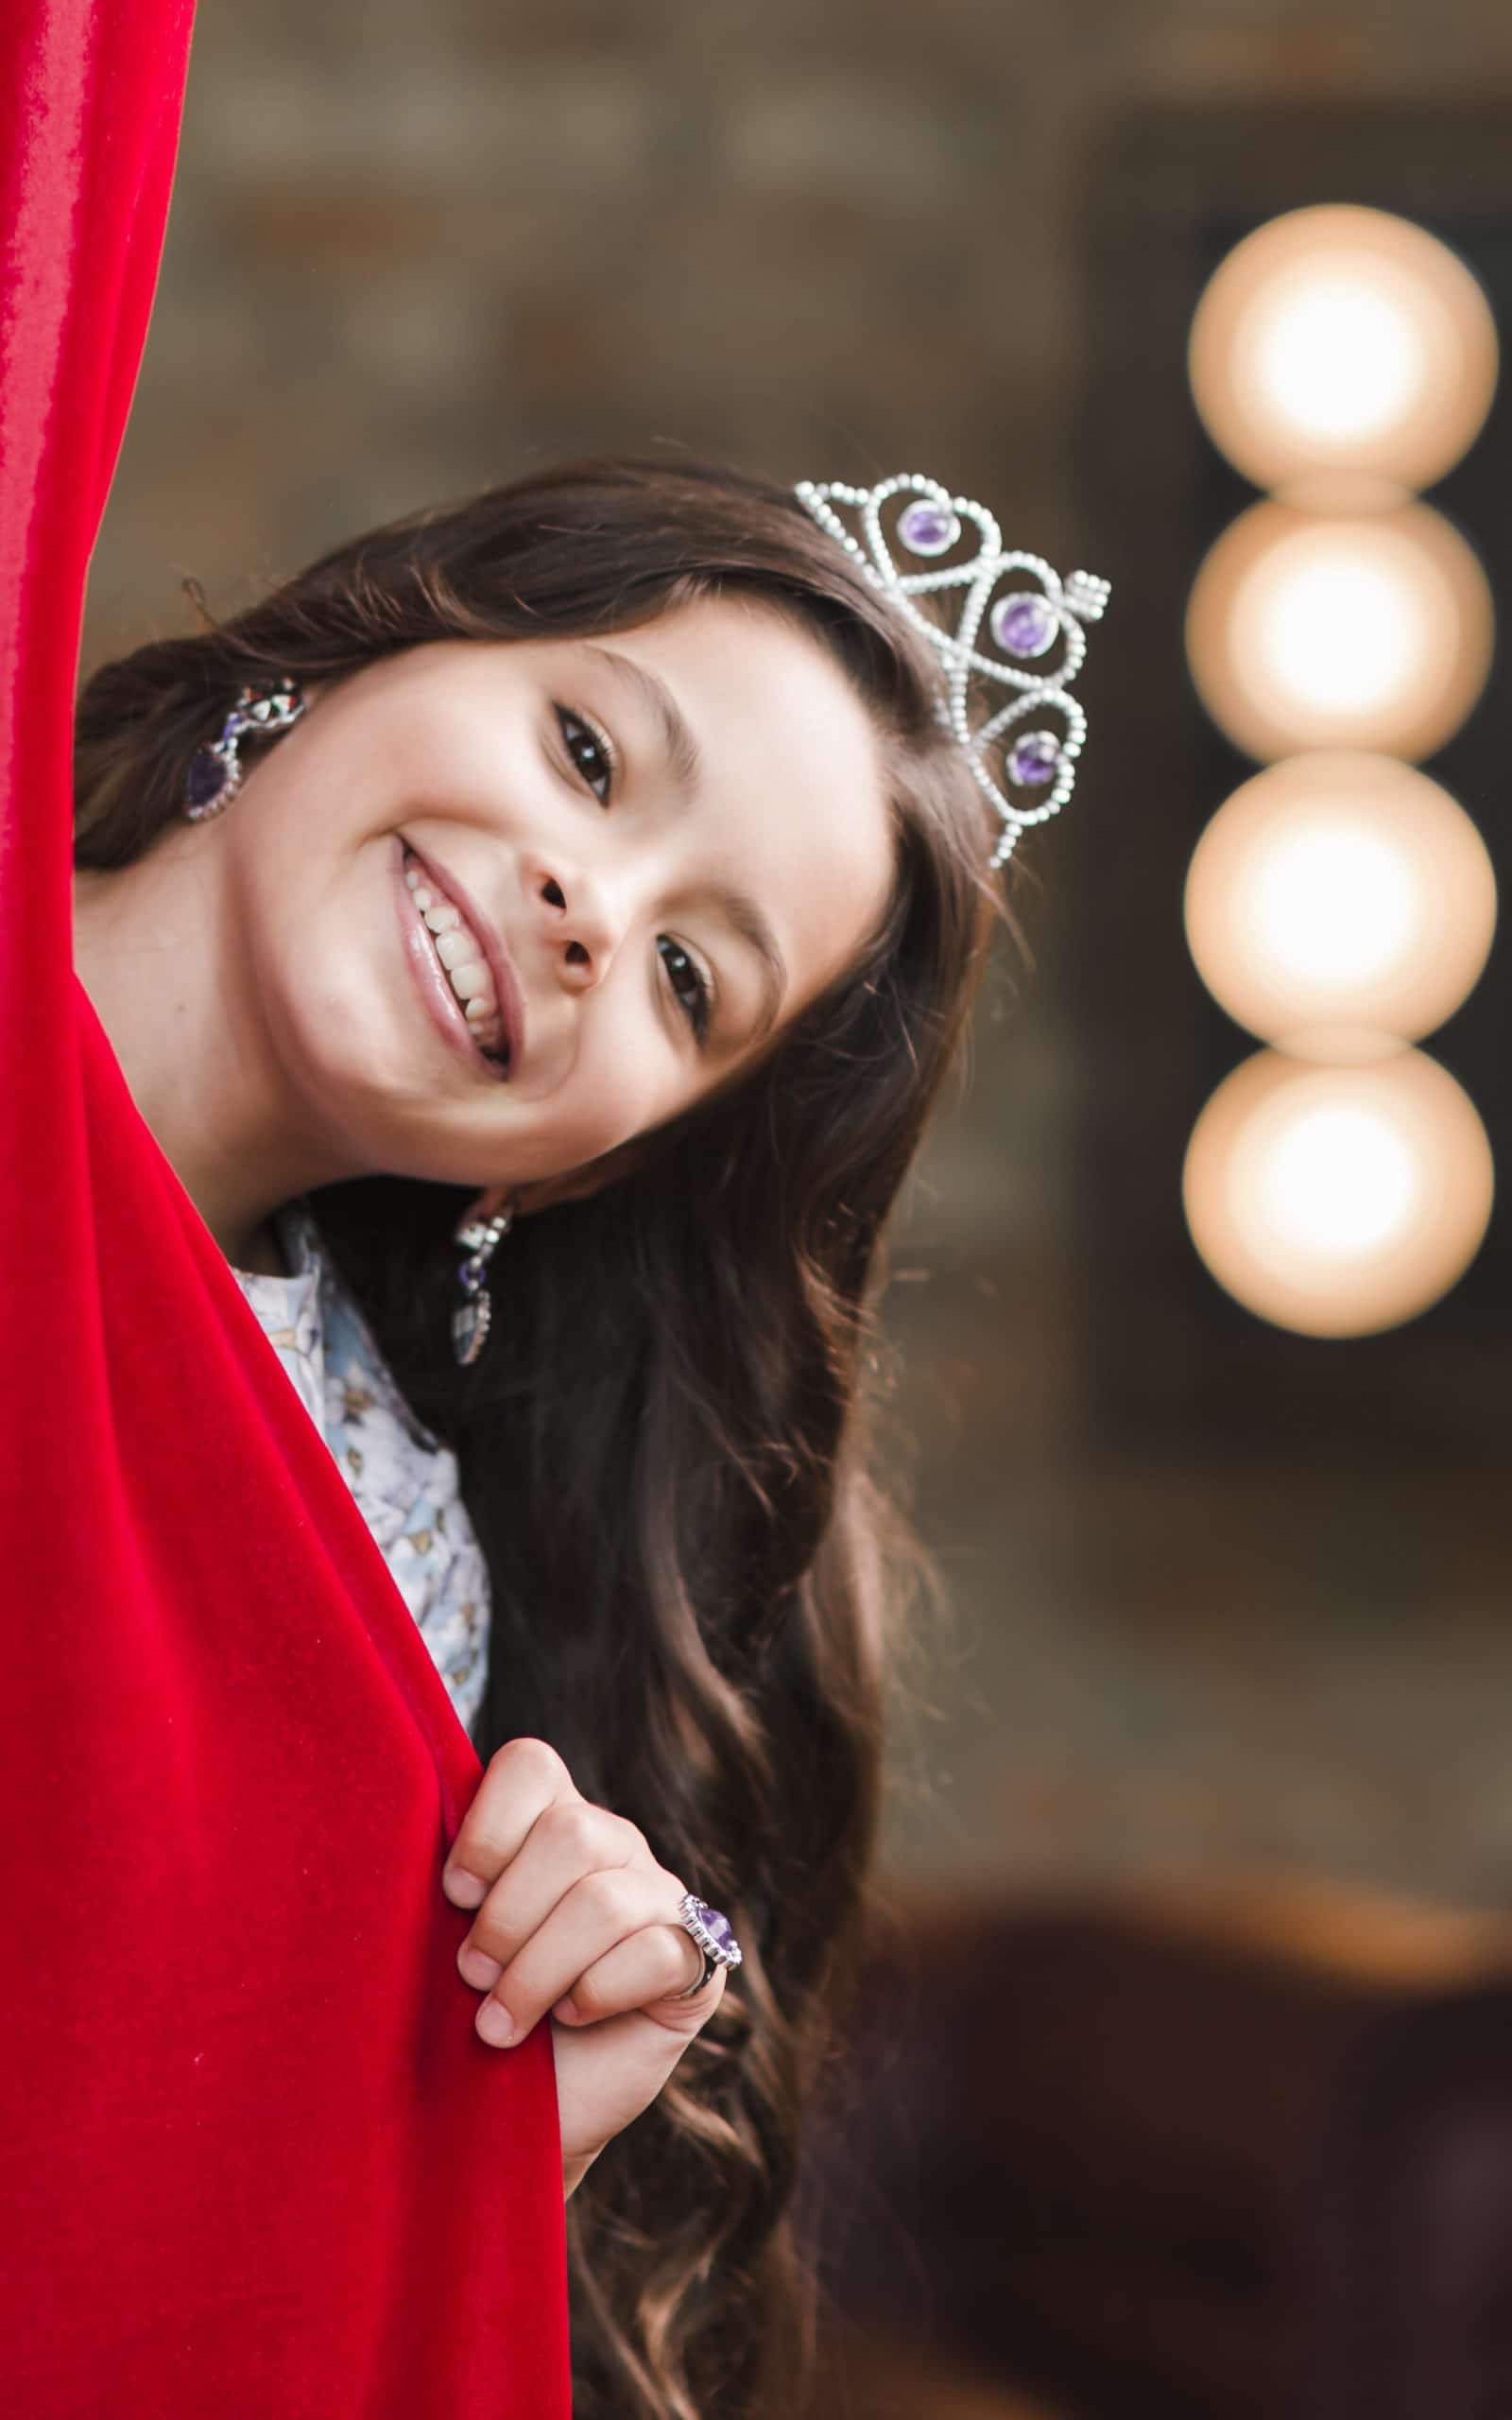 Children's theater :Smiling girl with a crown on her head behind red curtain